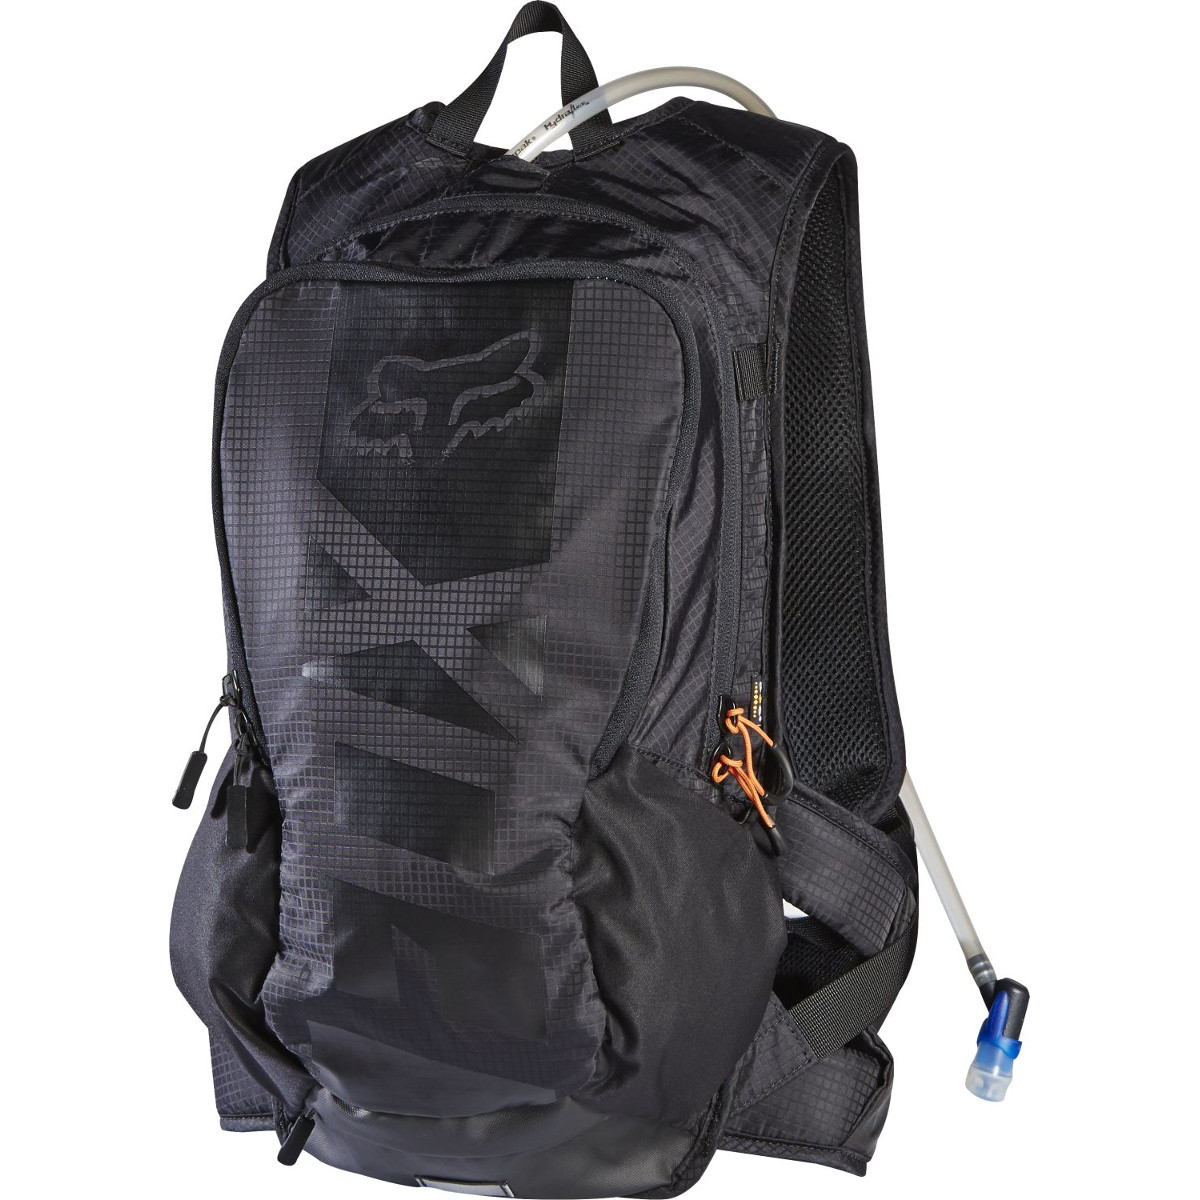 Fox Protector Backpack with Hydration System Compartment Small Camber Race D3O Black, 10 Liter